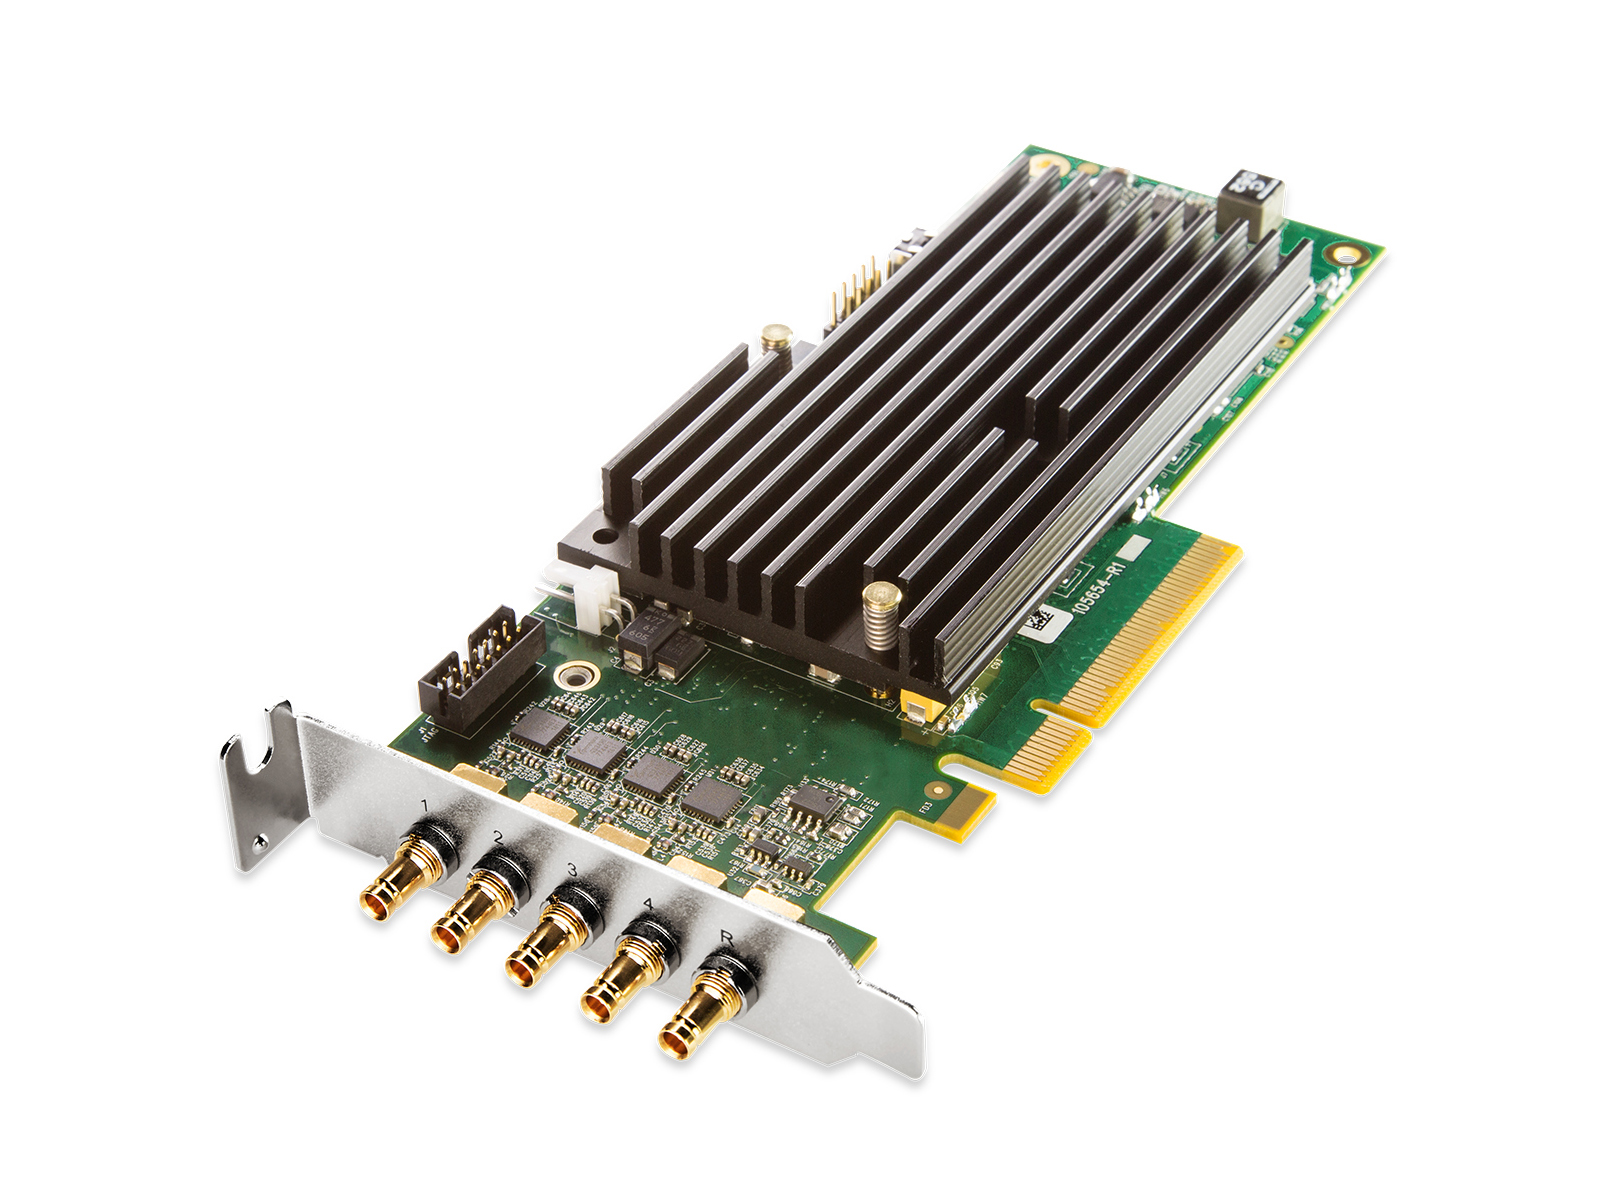 AJA CRV44-S-NCF Corvid 44 with low profile PCIe bracket and passive heat sink/no cables